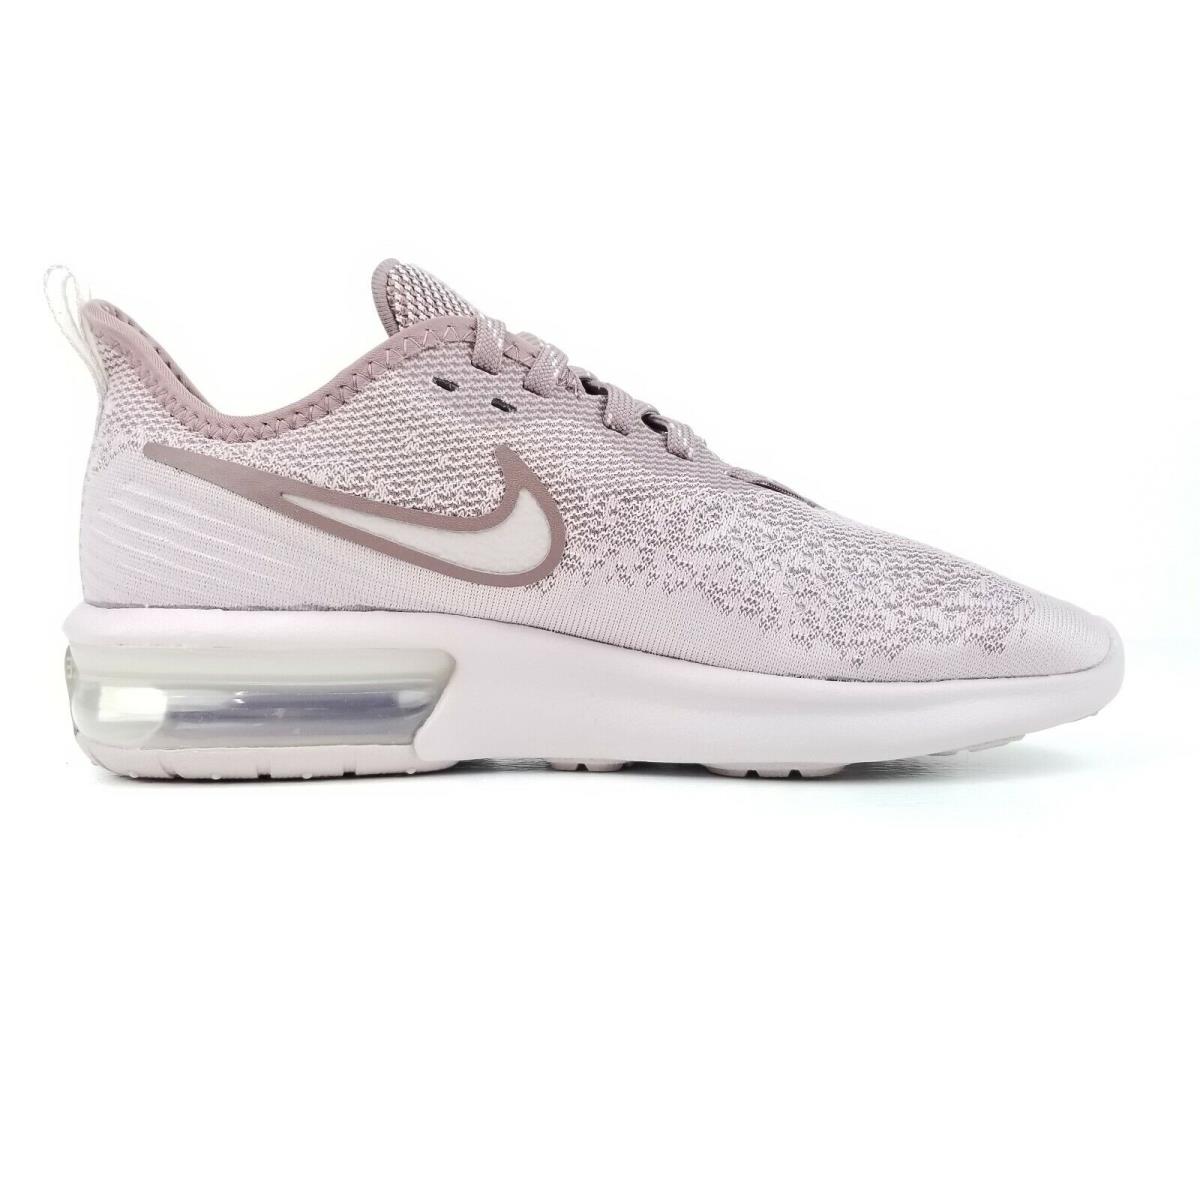 Nike shoes Air Max Sequent - Rose Pink 2